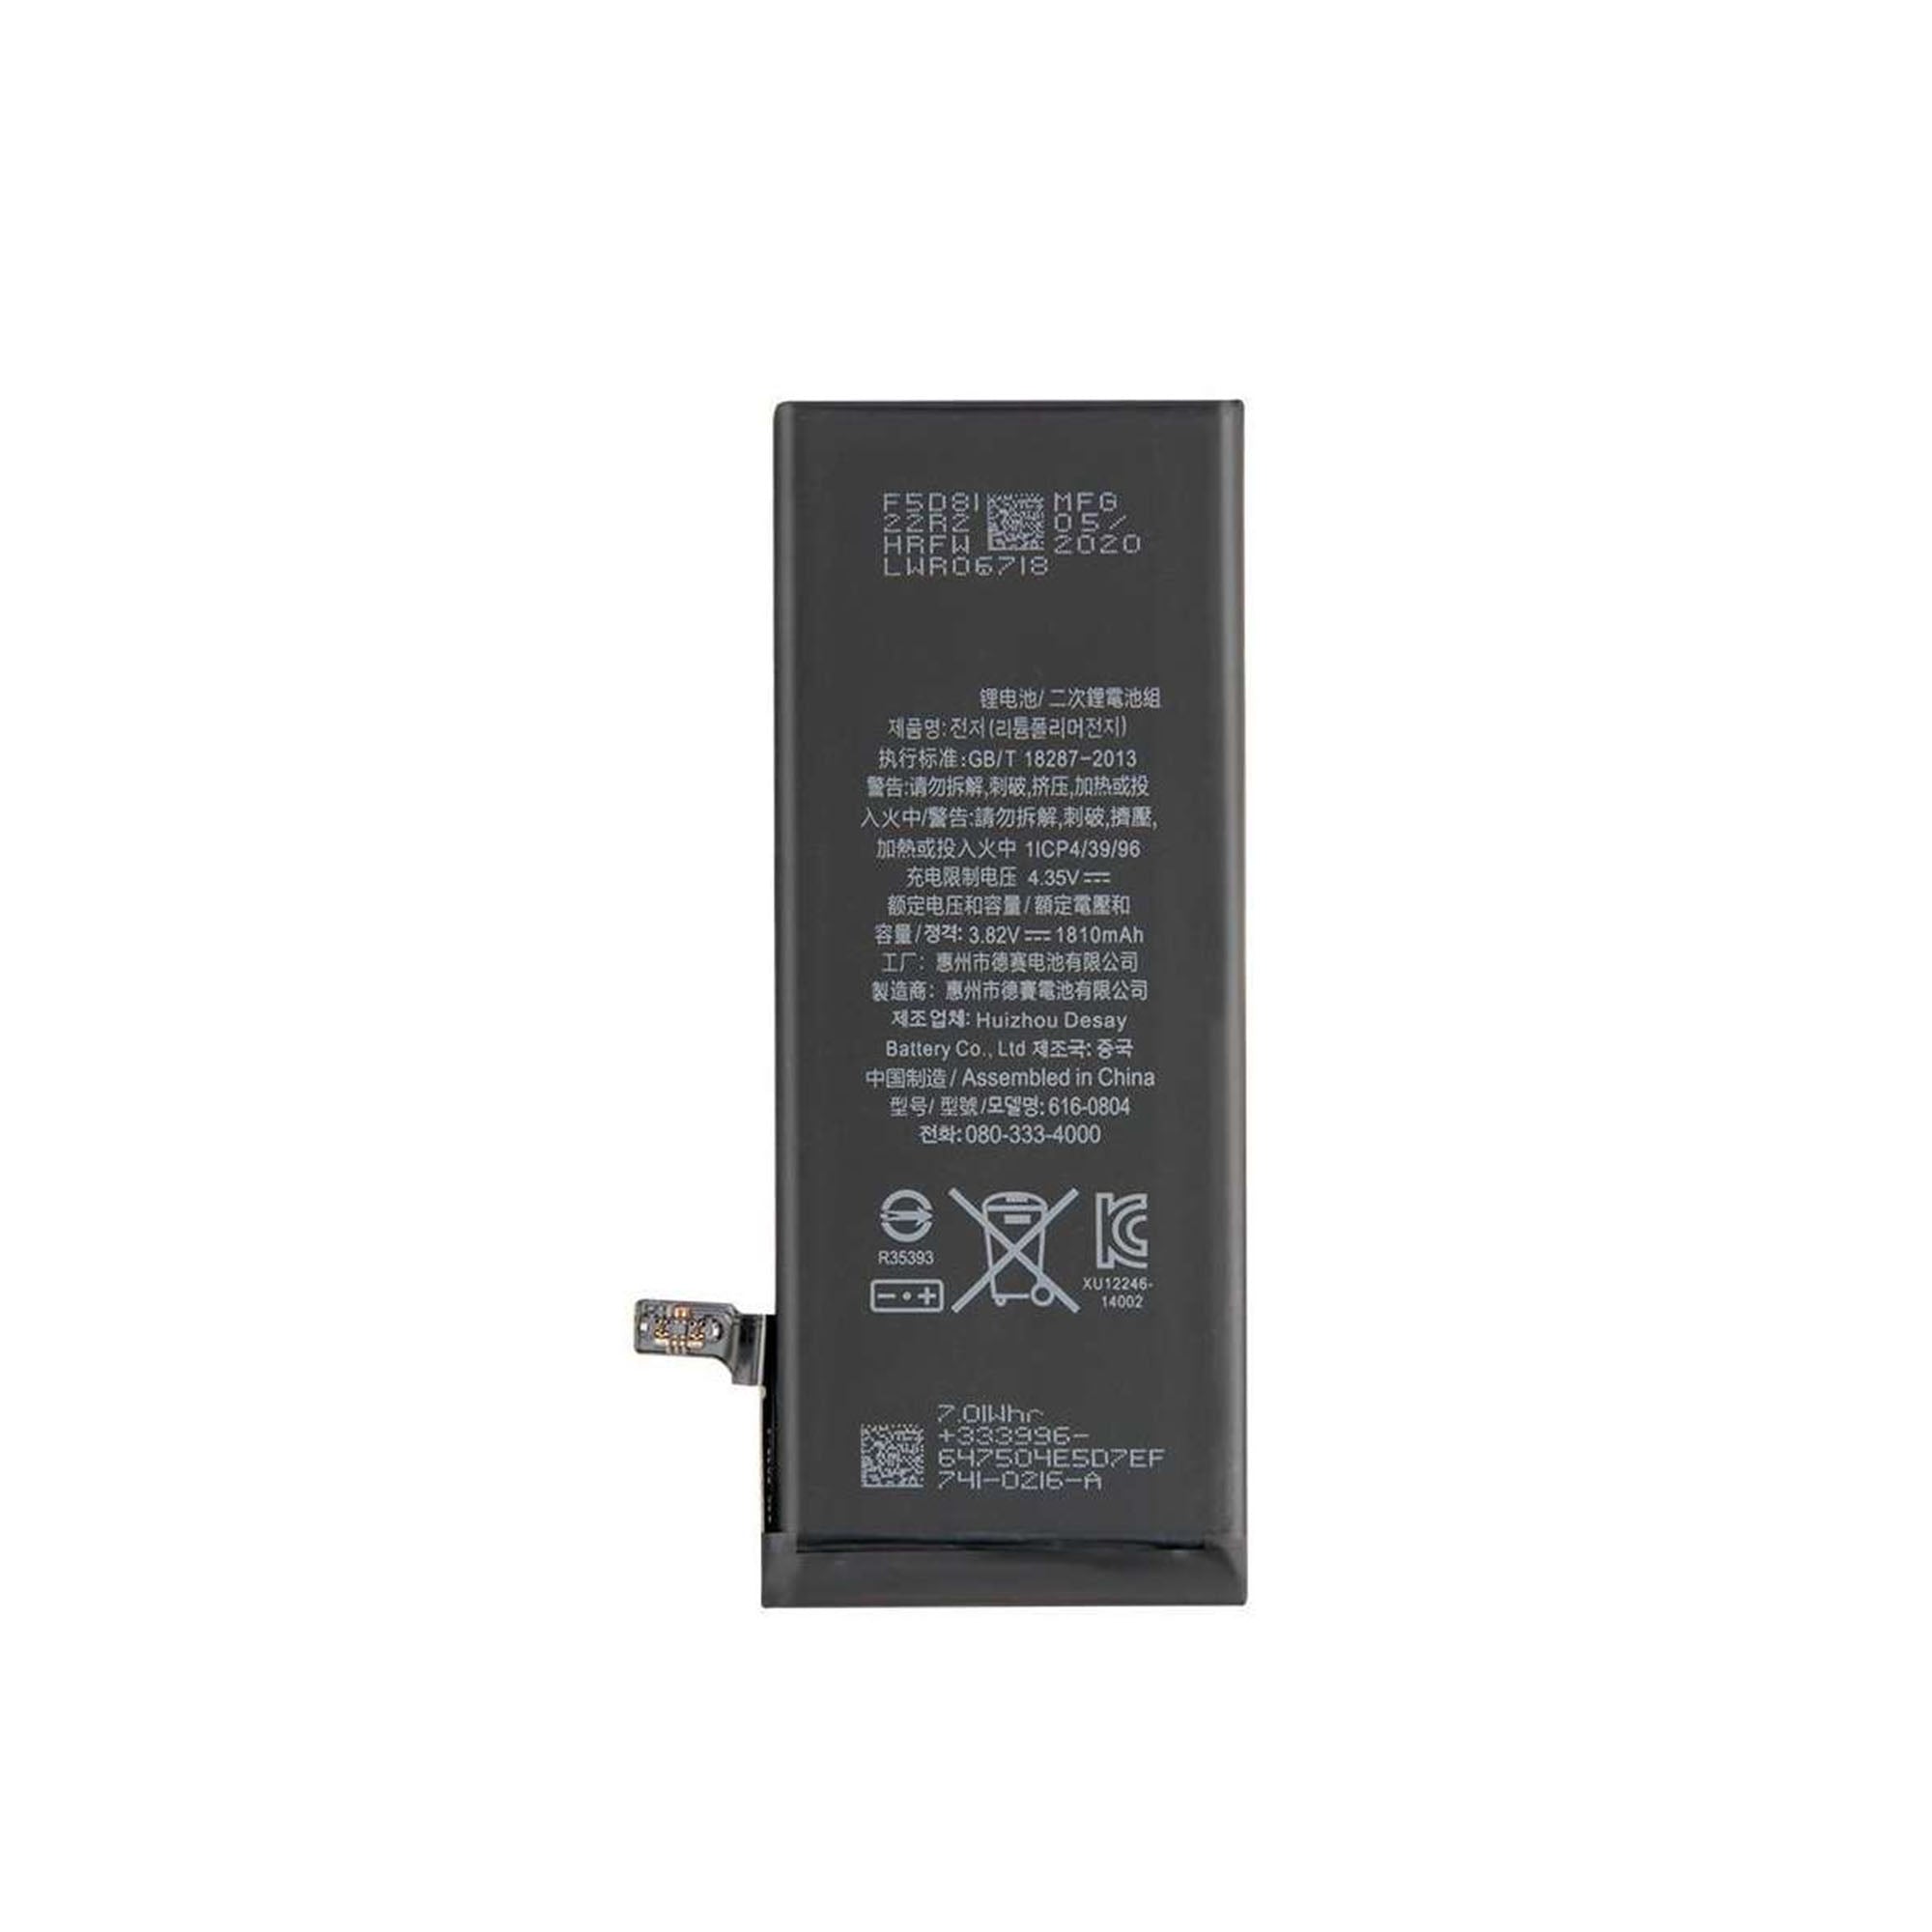 MOBILE BATTERY FOR IPHONE 6G